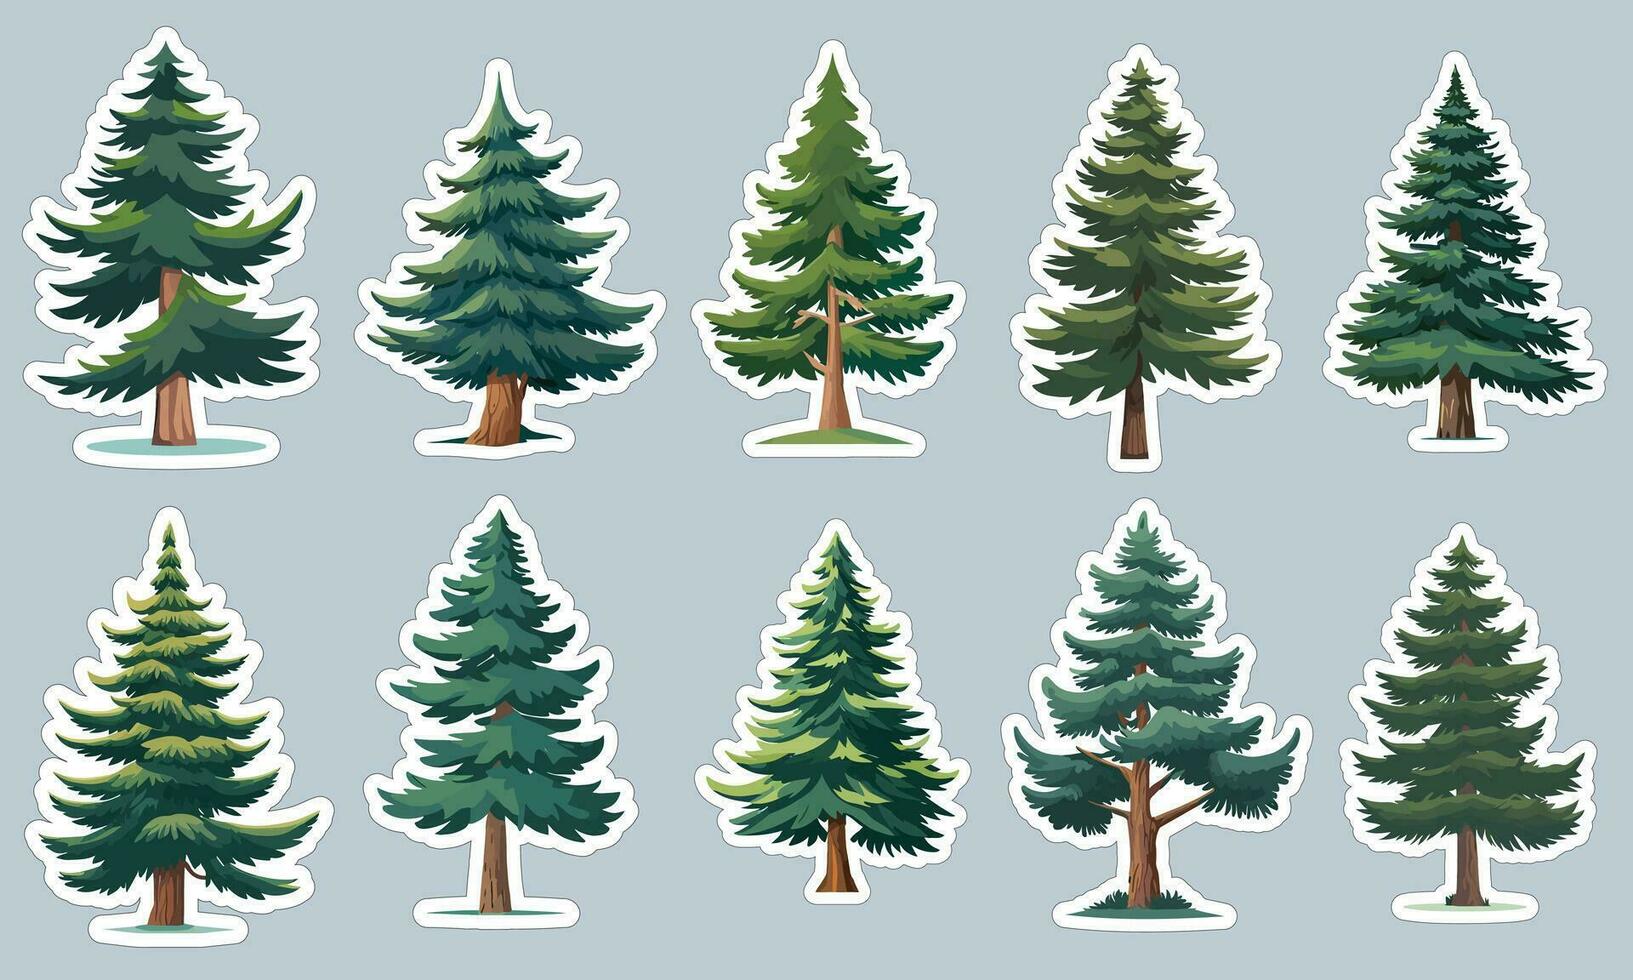 Panoramic pine tree sticker designs, perfect for decorating your laptop or water bottle vector